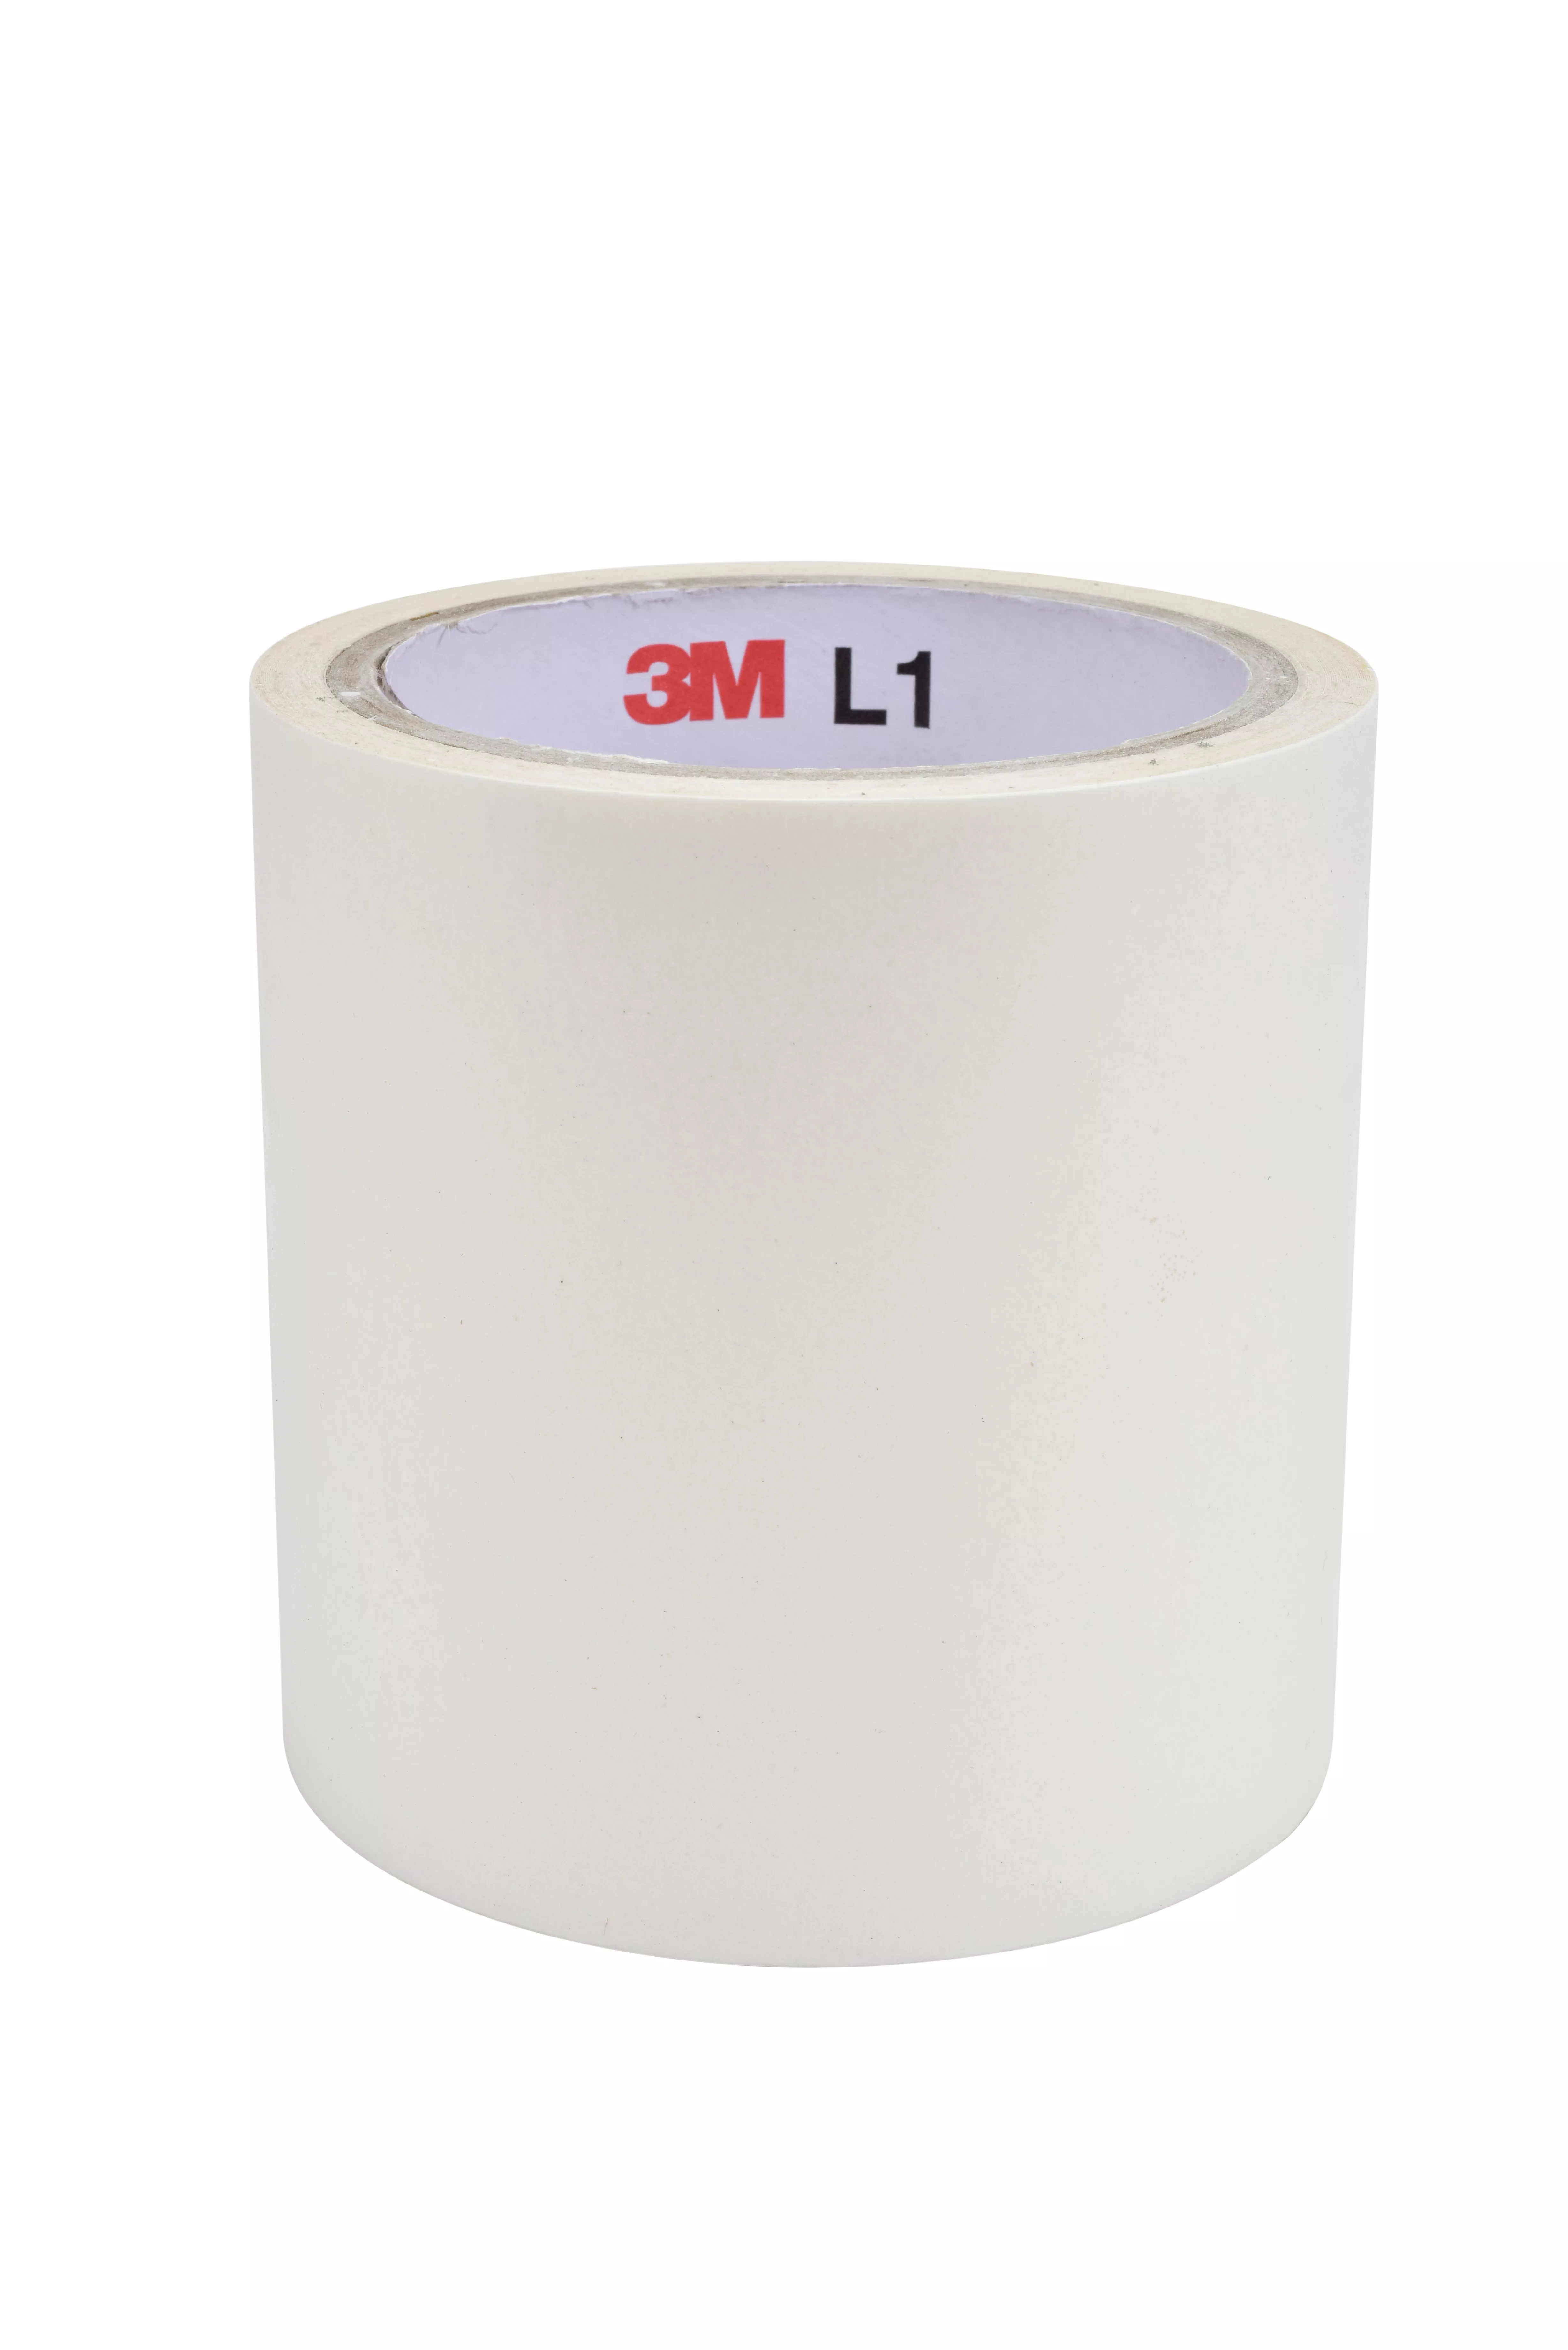 3M™ Double Coated Adhesive Tape L1+DCP, Clear, 1000 mm x 230 m, 0.09 mm,
6 Roll/Pallet